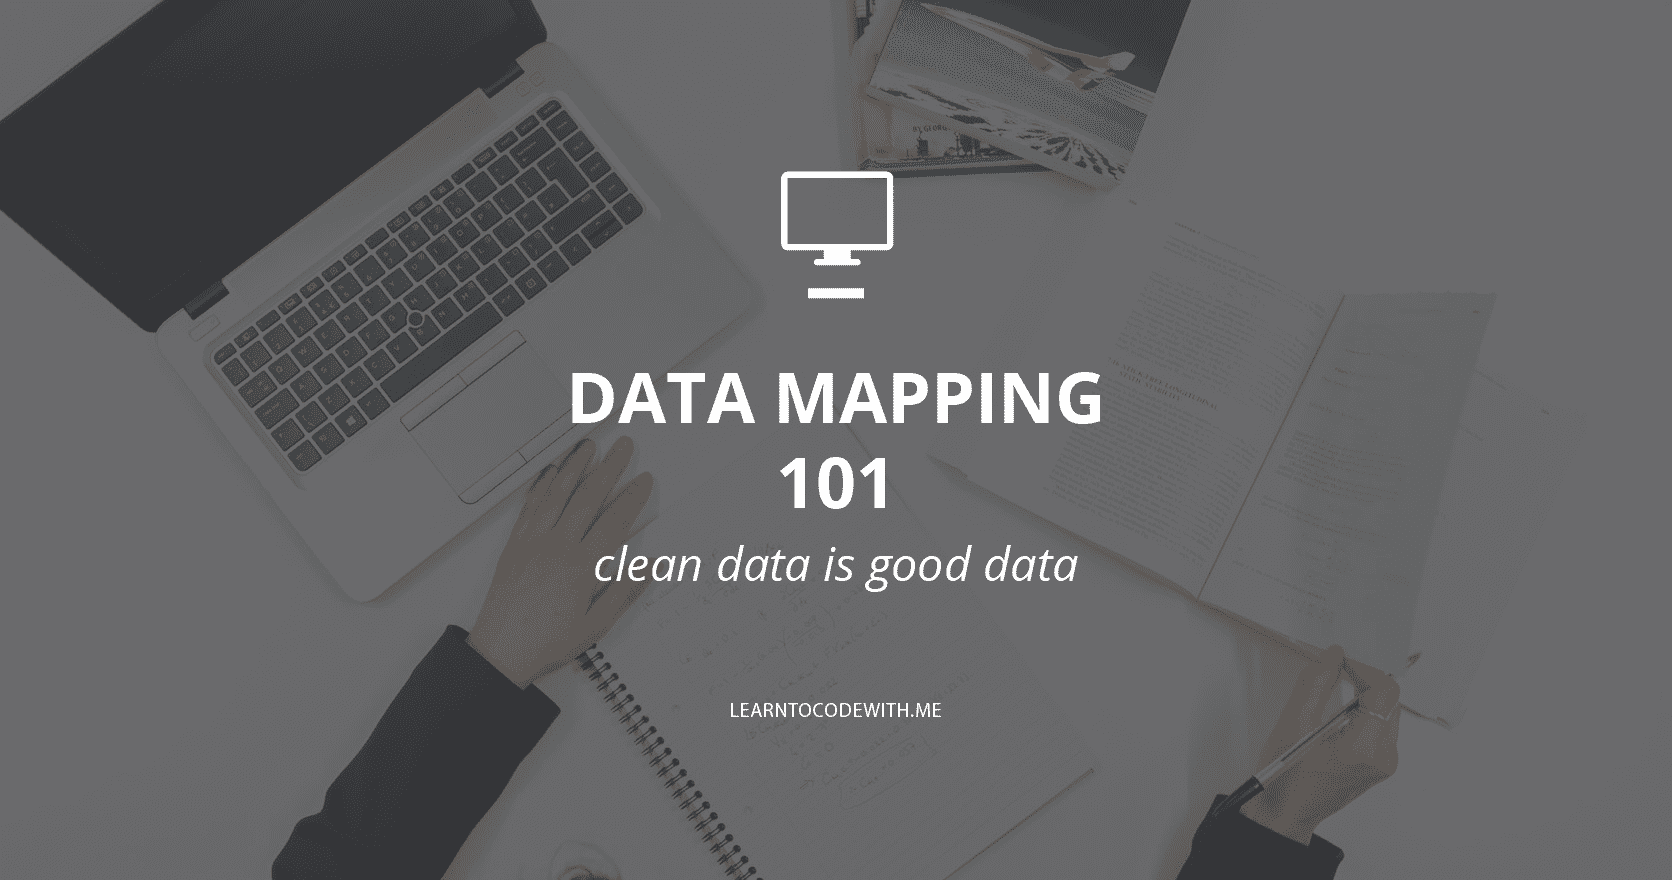 Data mapping